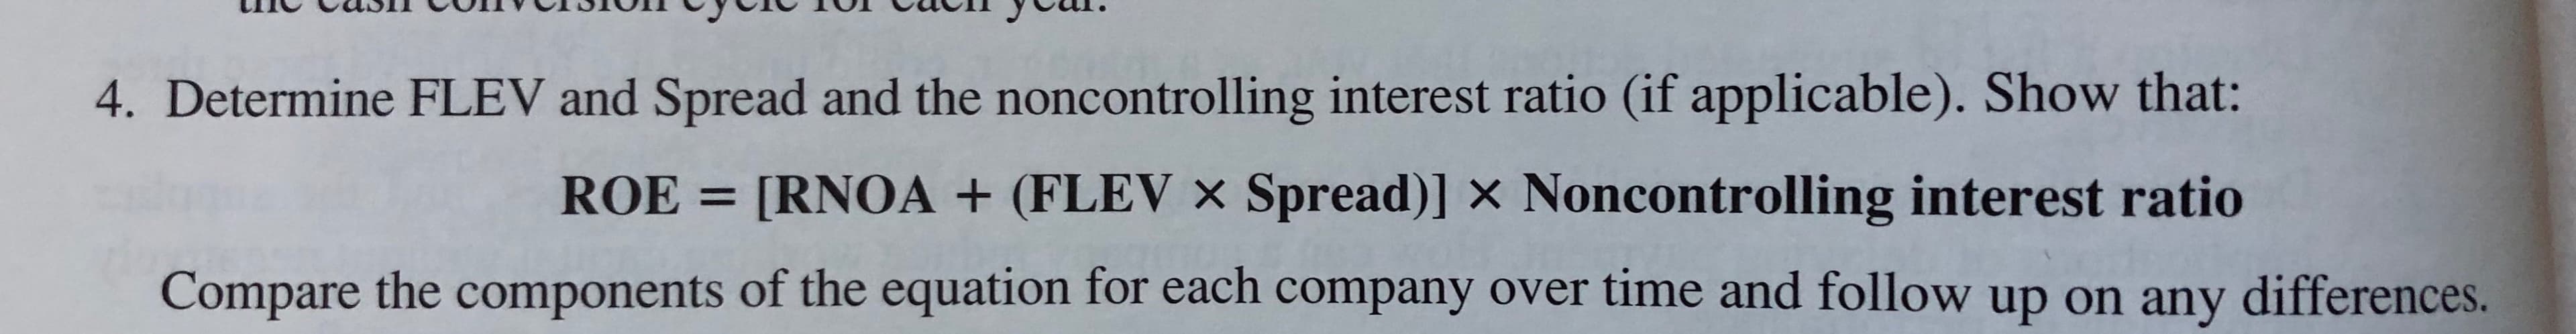 4. Determine FLEV and Spread and the noncontrolling interest ratio (if applicable). Show that:
[RNOA + (FLEV x Spread)] x Noncontrolling interest ratio
ROE
Compare the components of the equation for each company over time and follow up on any differences.
